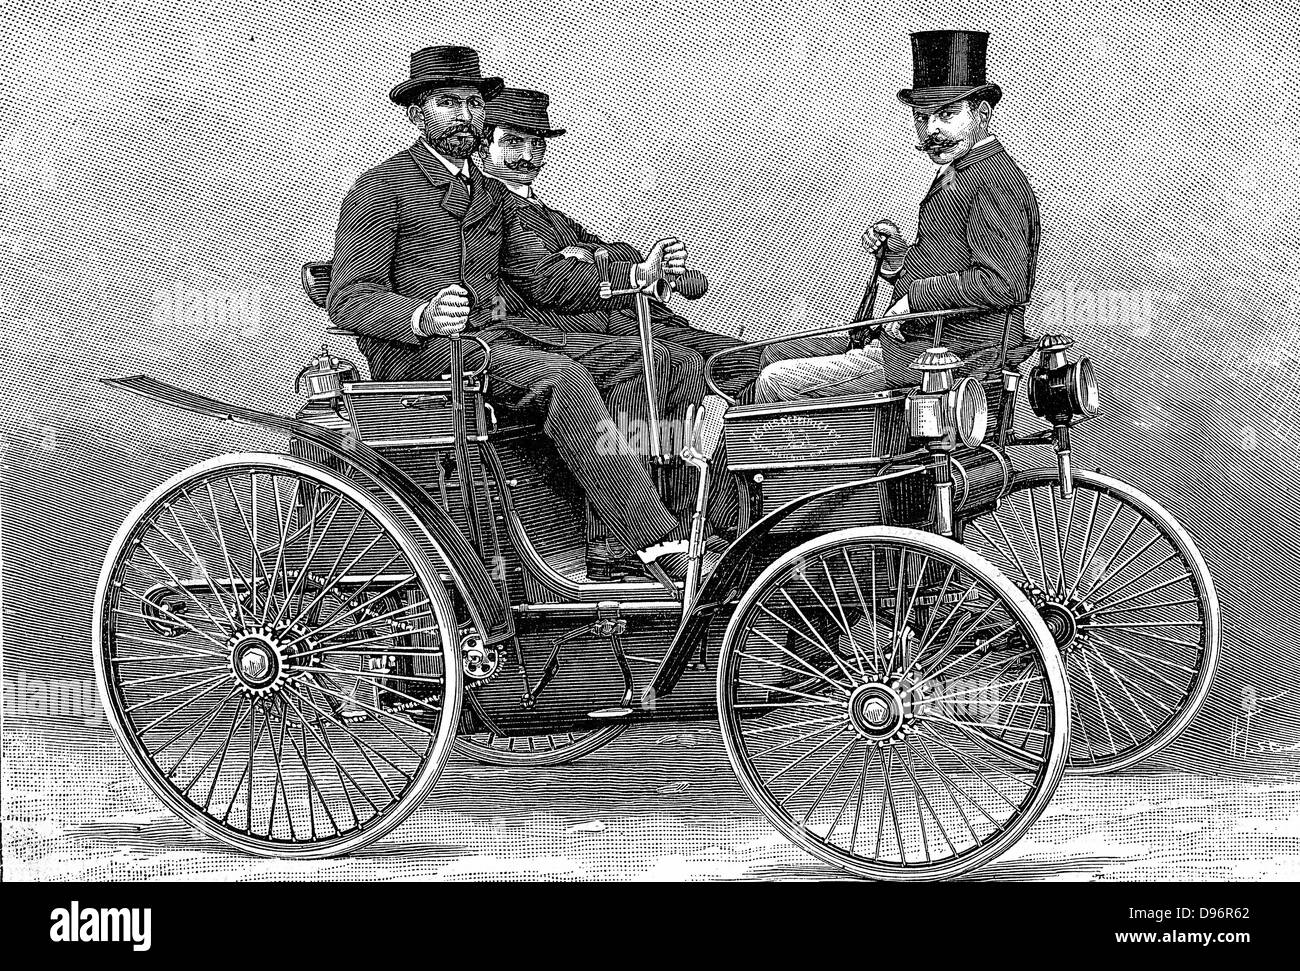 Armand Peugot's (1849-1915) motor car fitted with Daimler V-twin petrol engine. First petrol driven car built in France 1889-1890. Engraving. Stock Photo